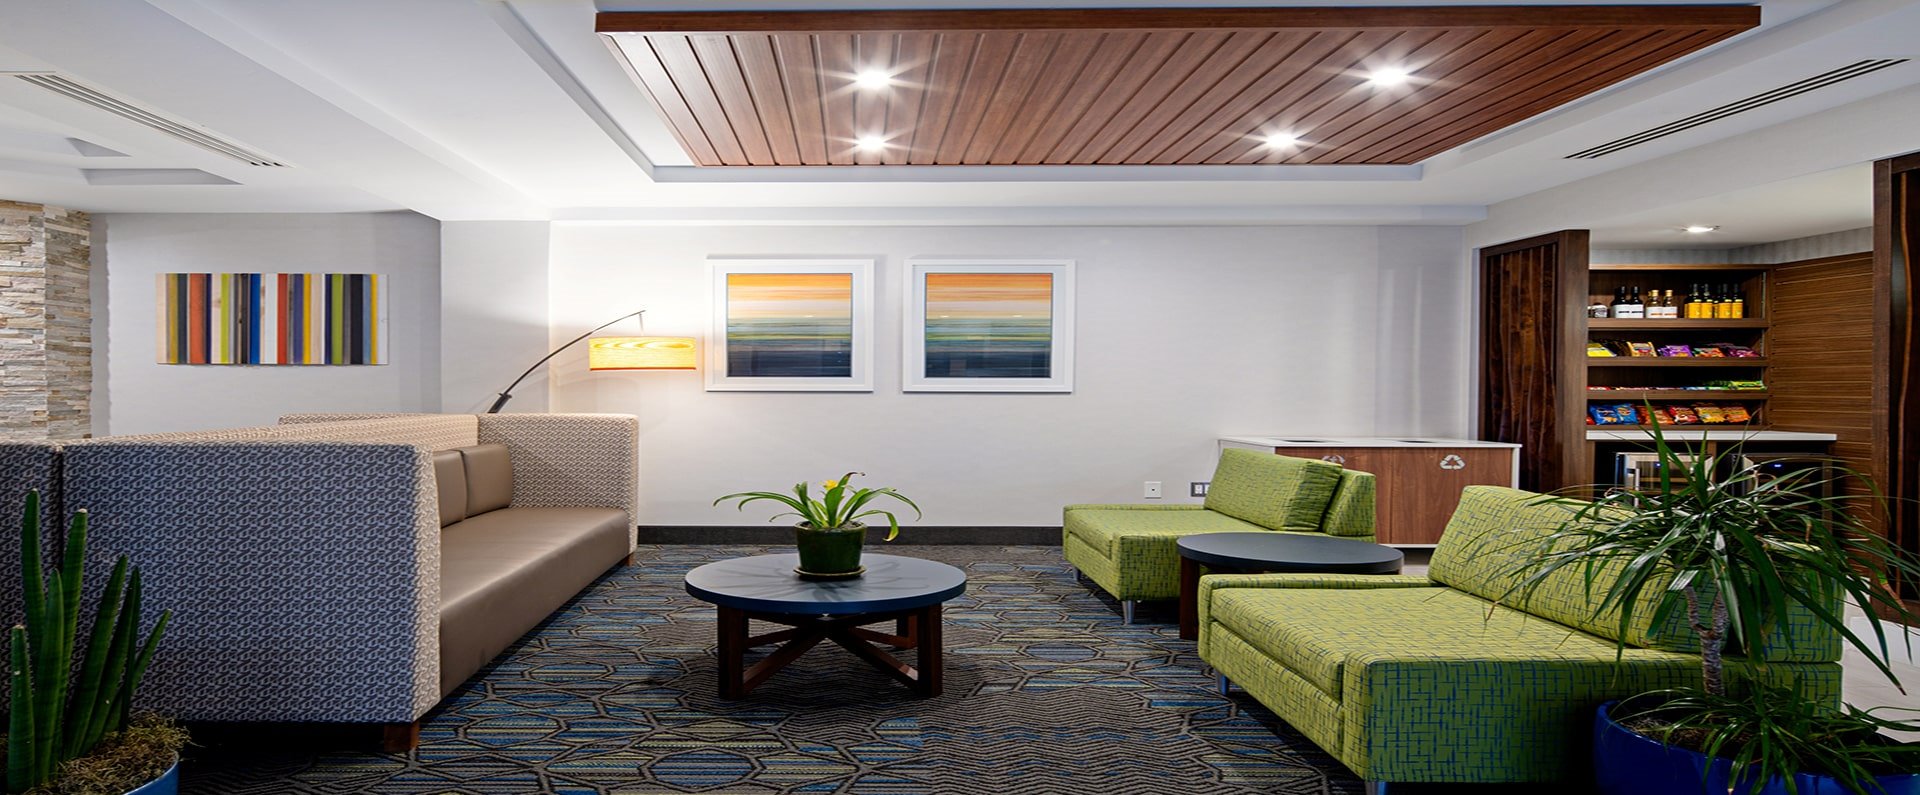 HOLIDAY INN EXPRESS & SUITES Lobby